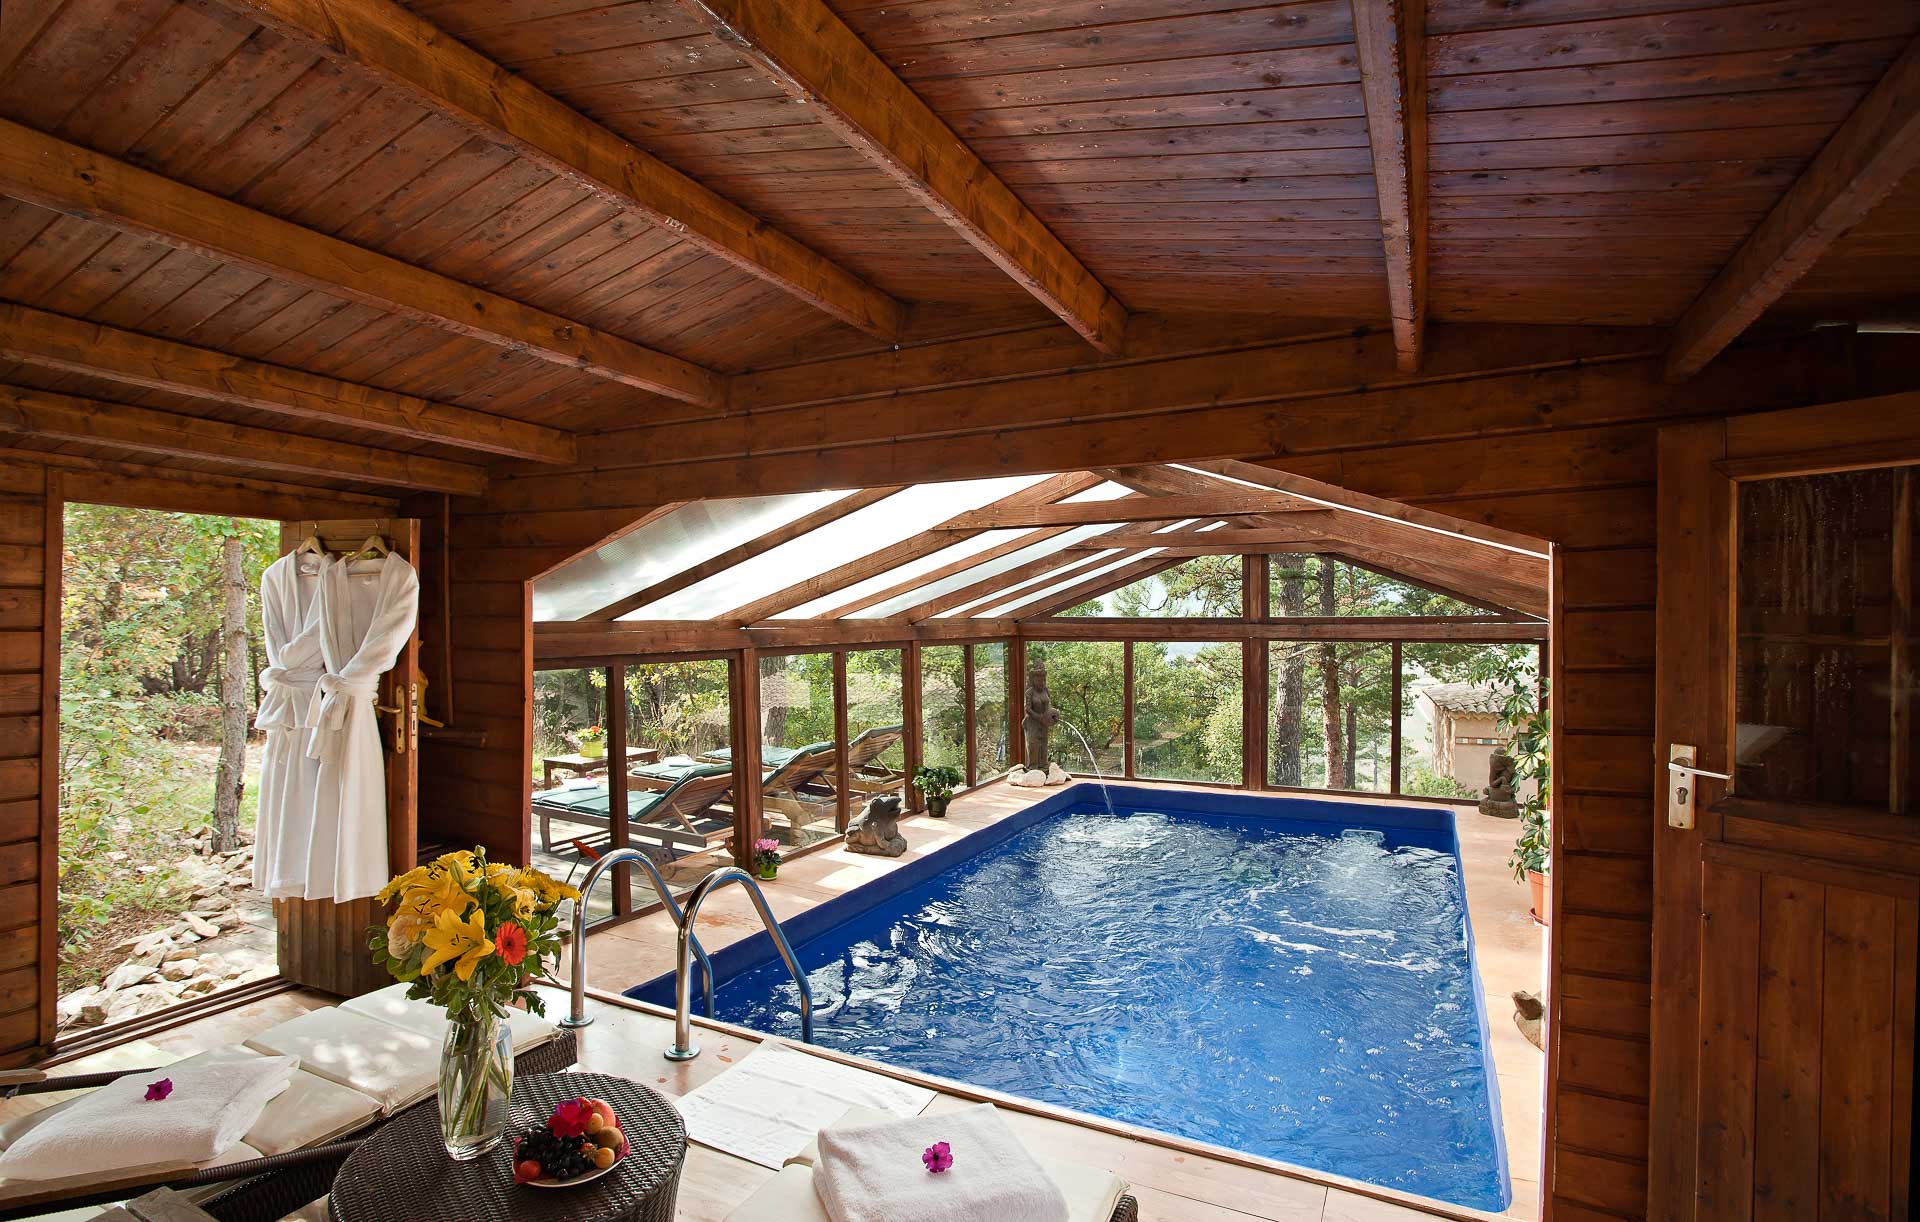 Indoor swimming pool at the Domaine du Val de Sault hotel - 4-star hotel in the Luberon region